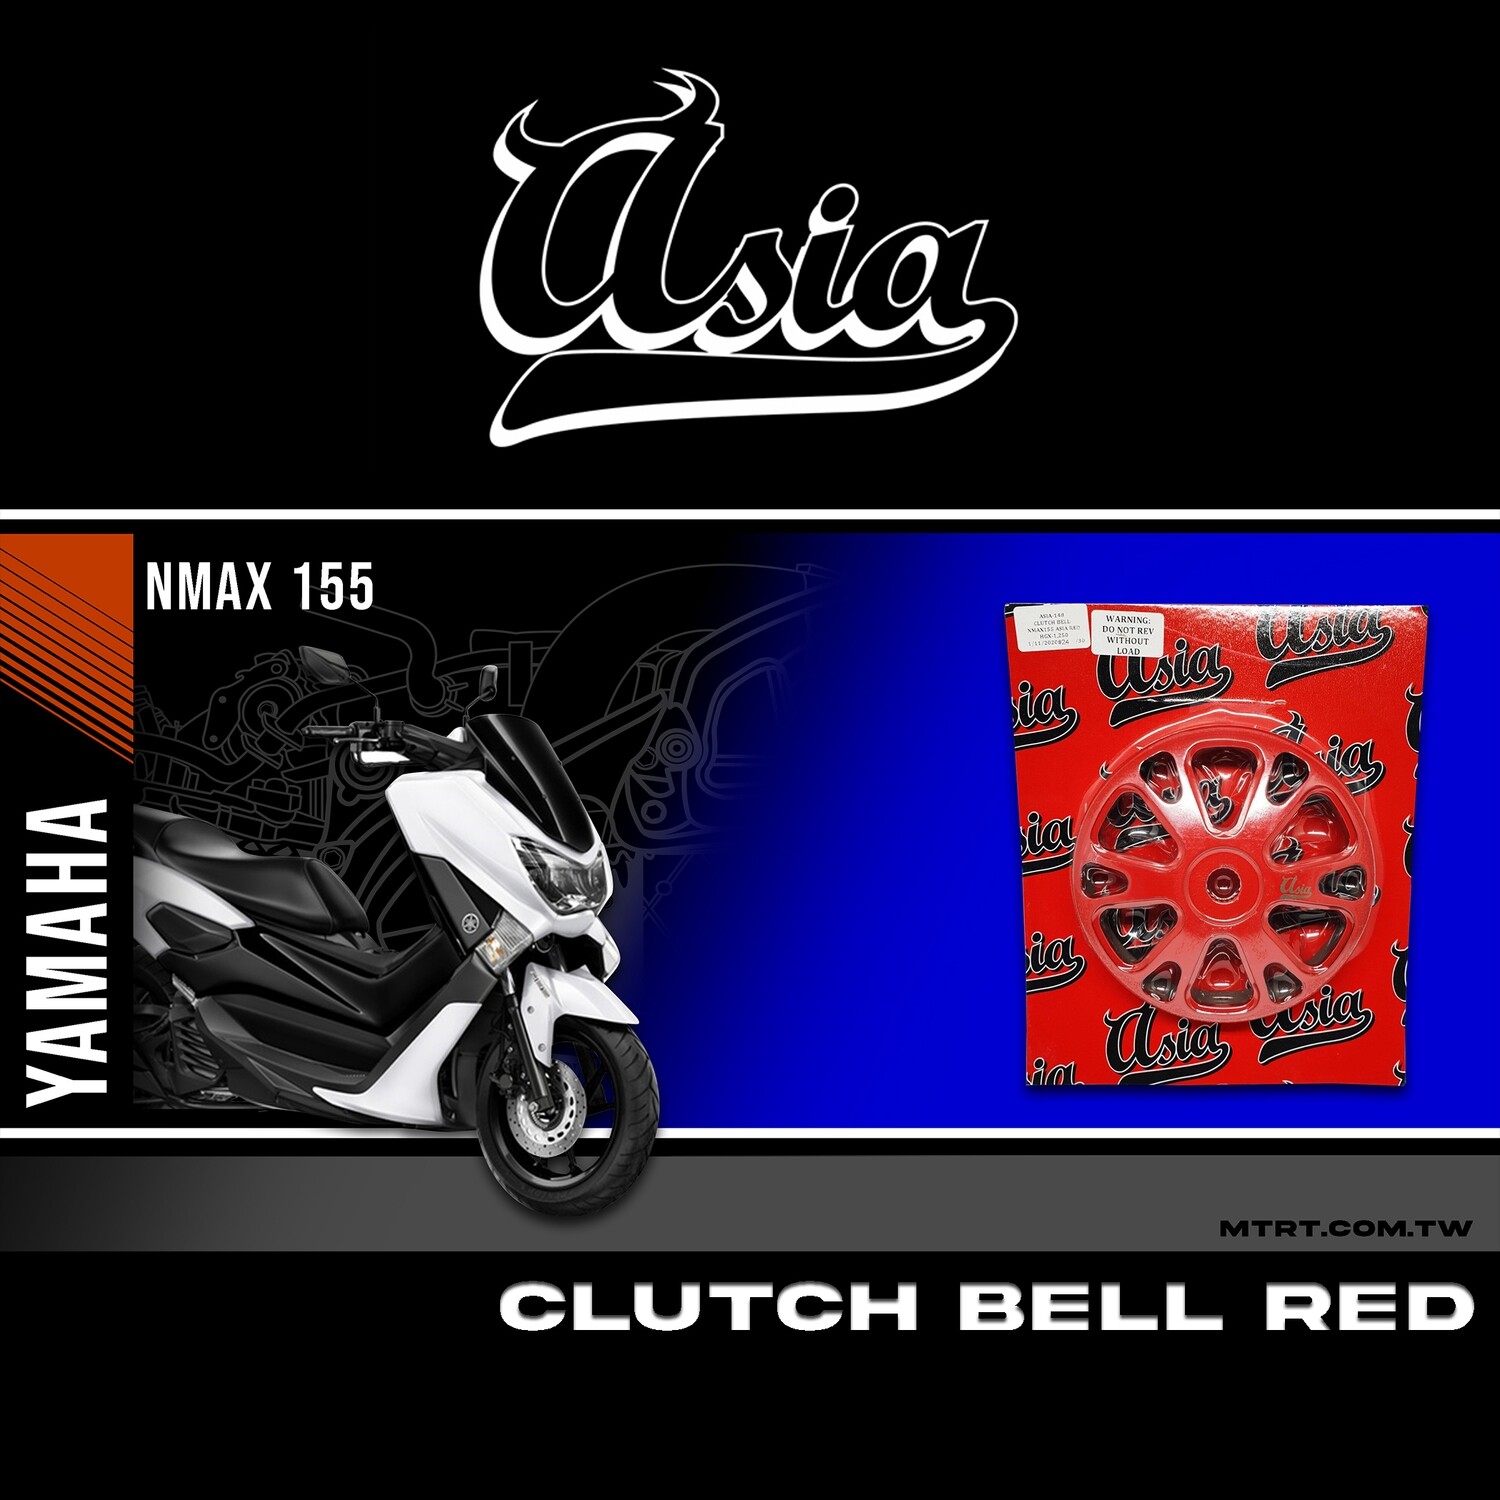 CLUTCH BELL NMAX155 ASIA RED